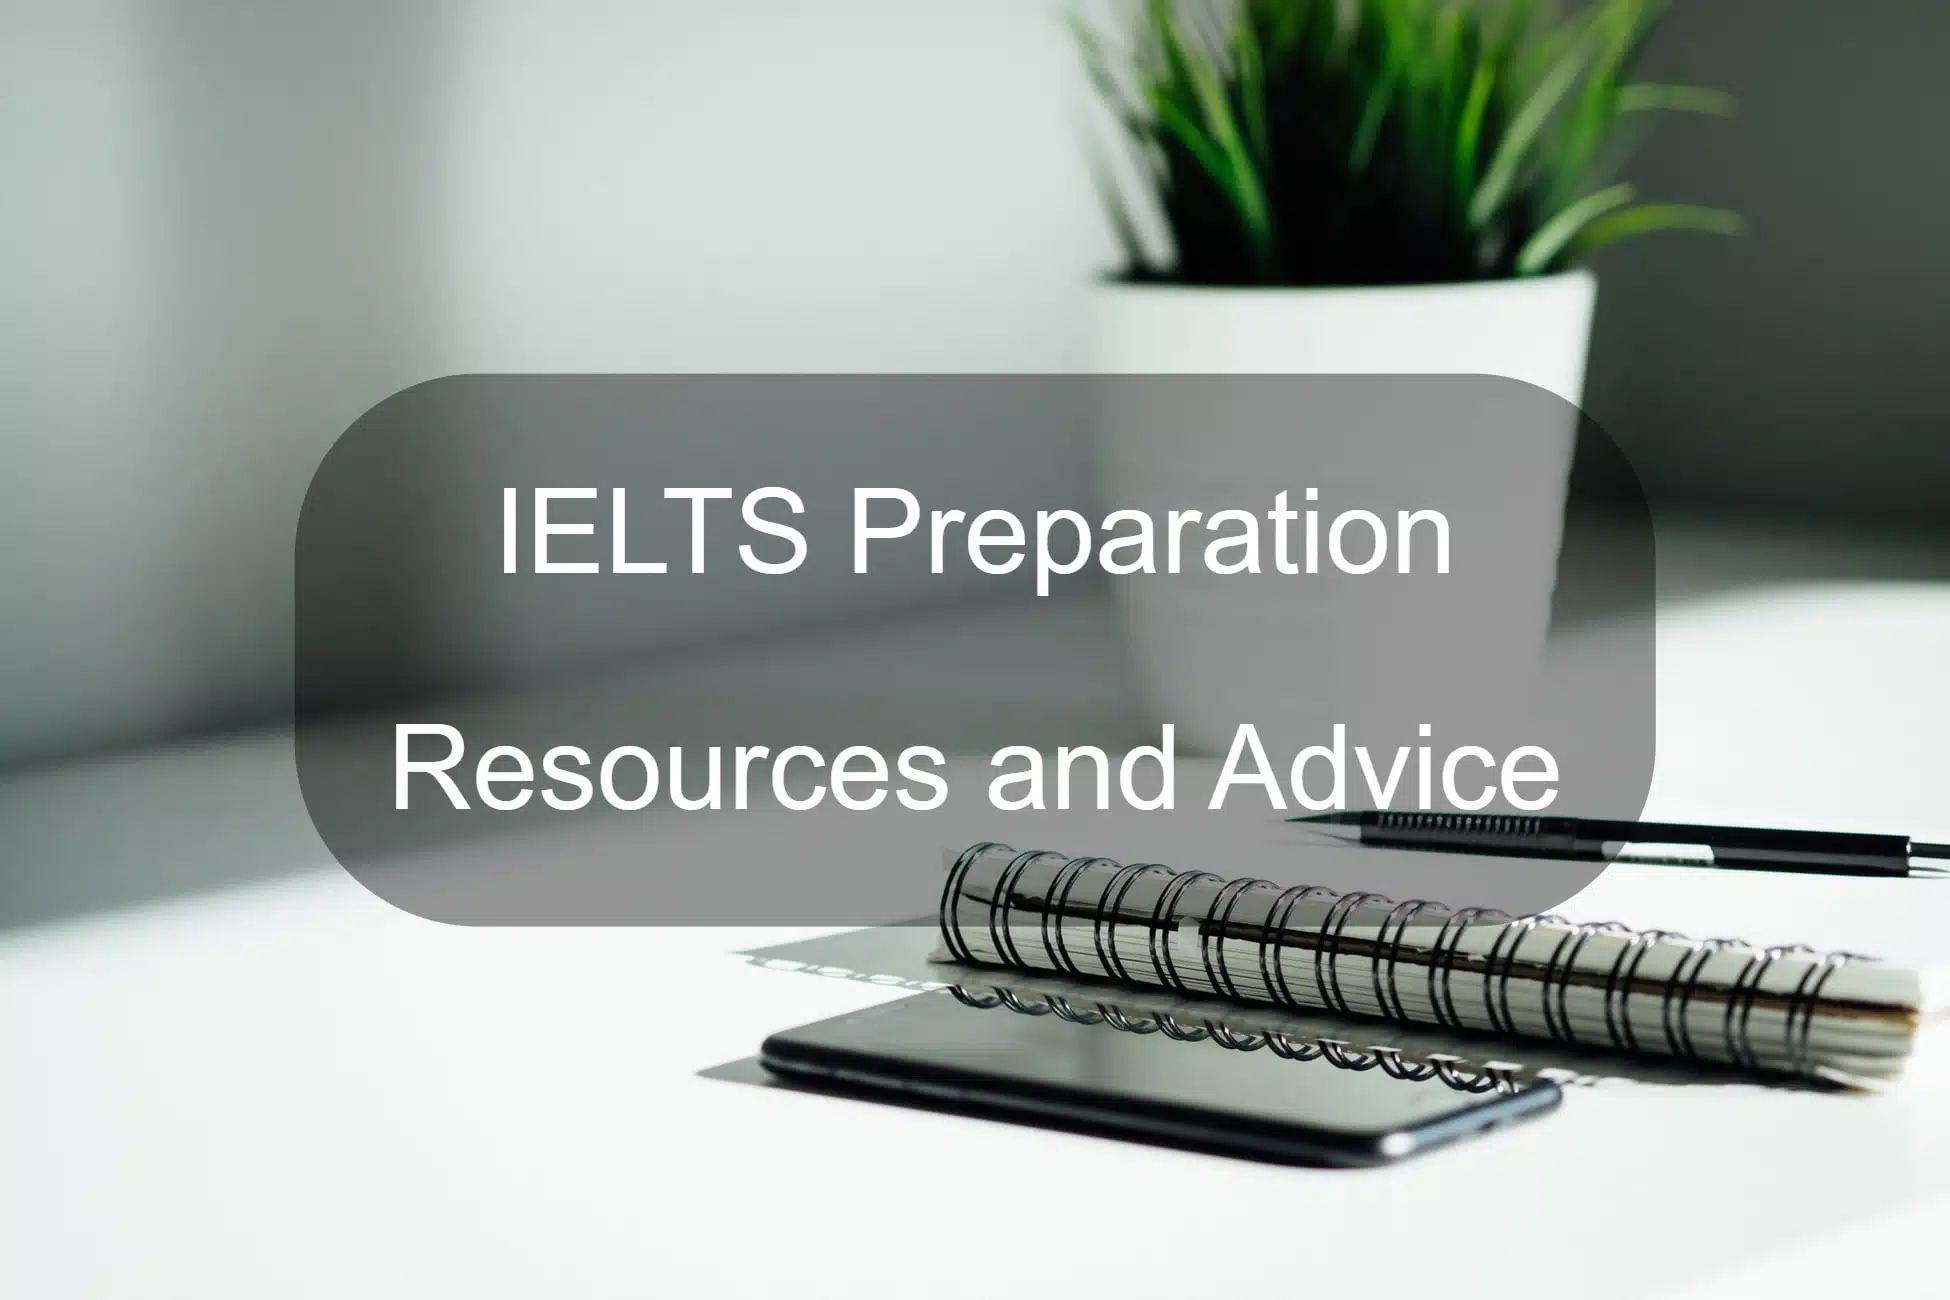 IELTS preparation resources and advice